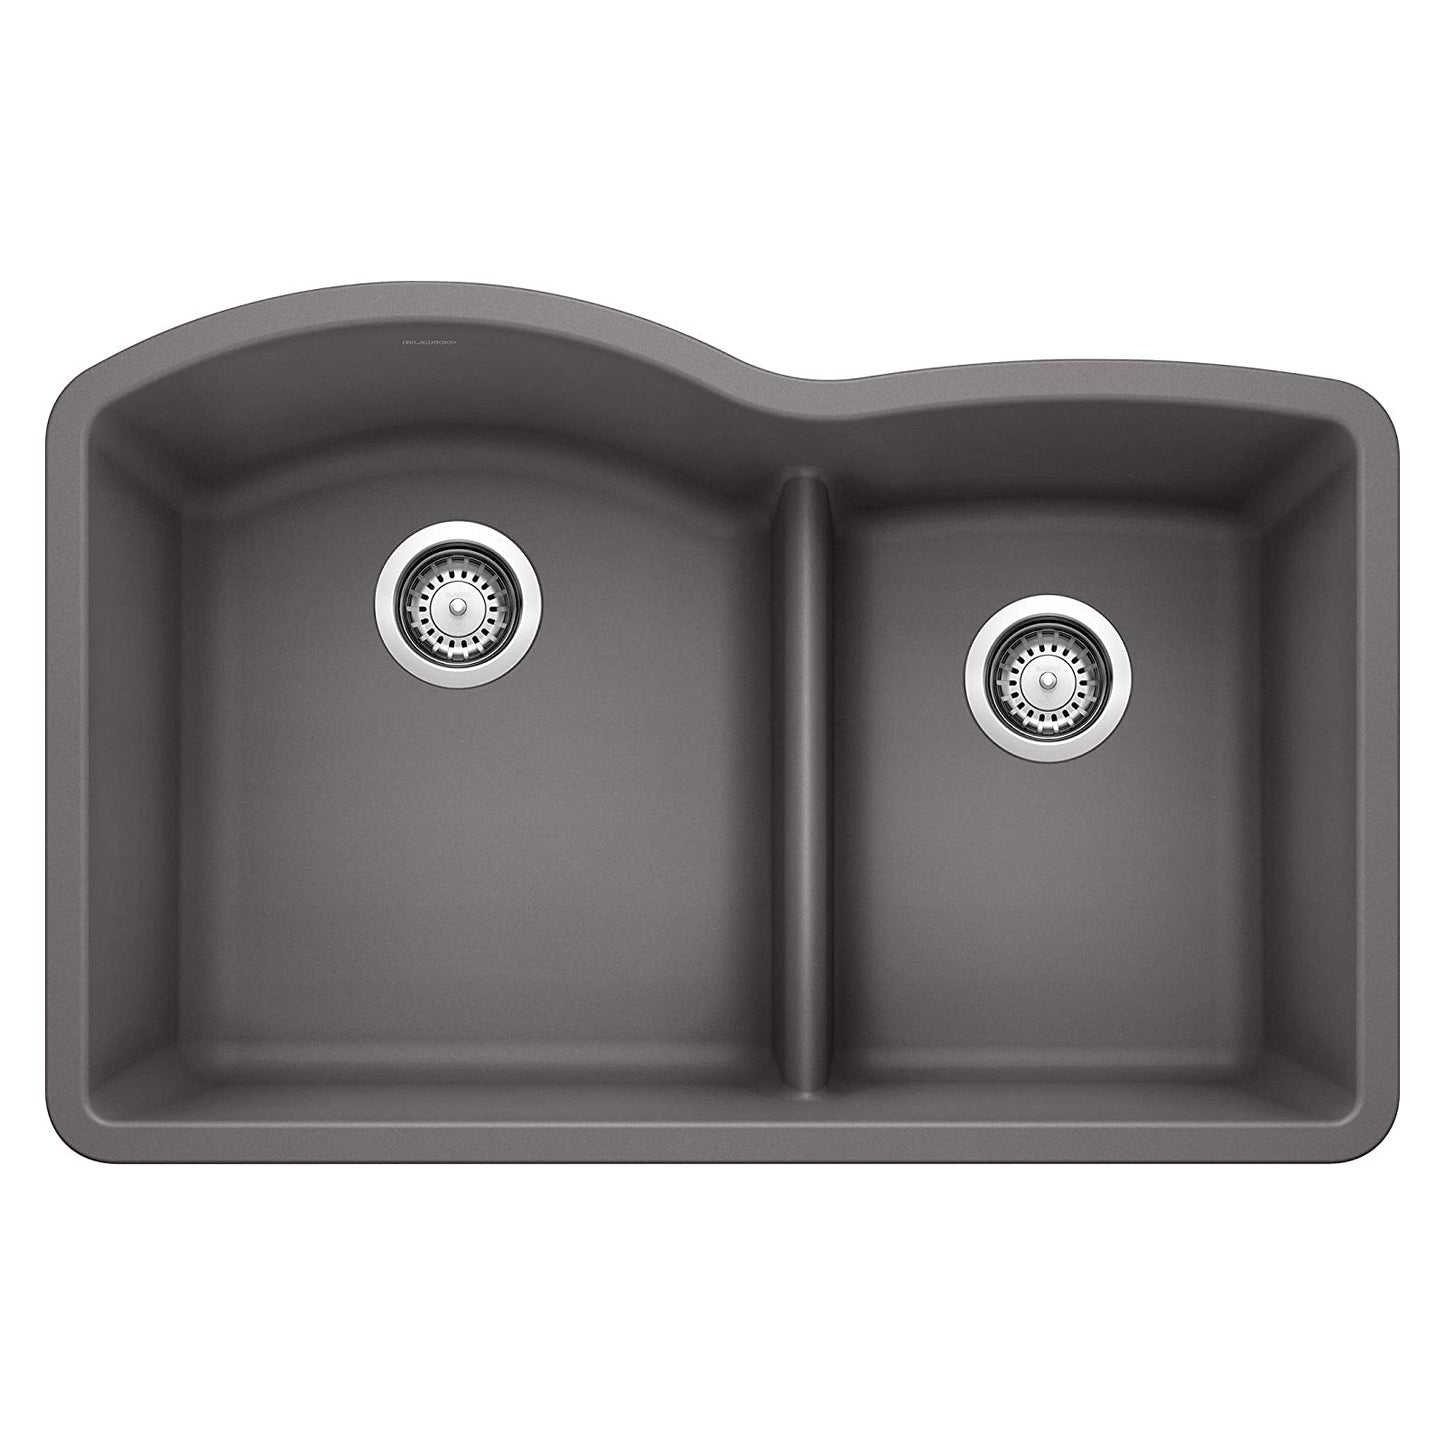 Diamond 1-3/4 Double Bowl Undermount Kitchen Sink with Low Divide, 32" X 21" - Cinder